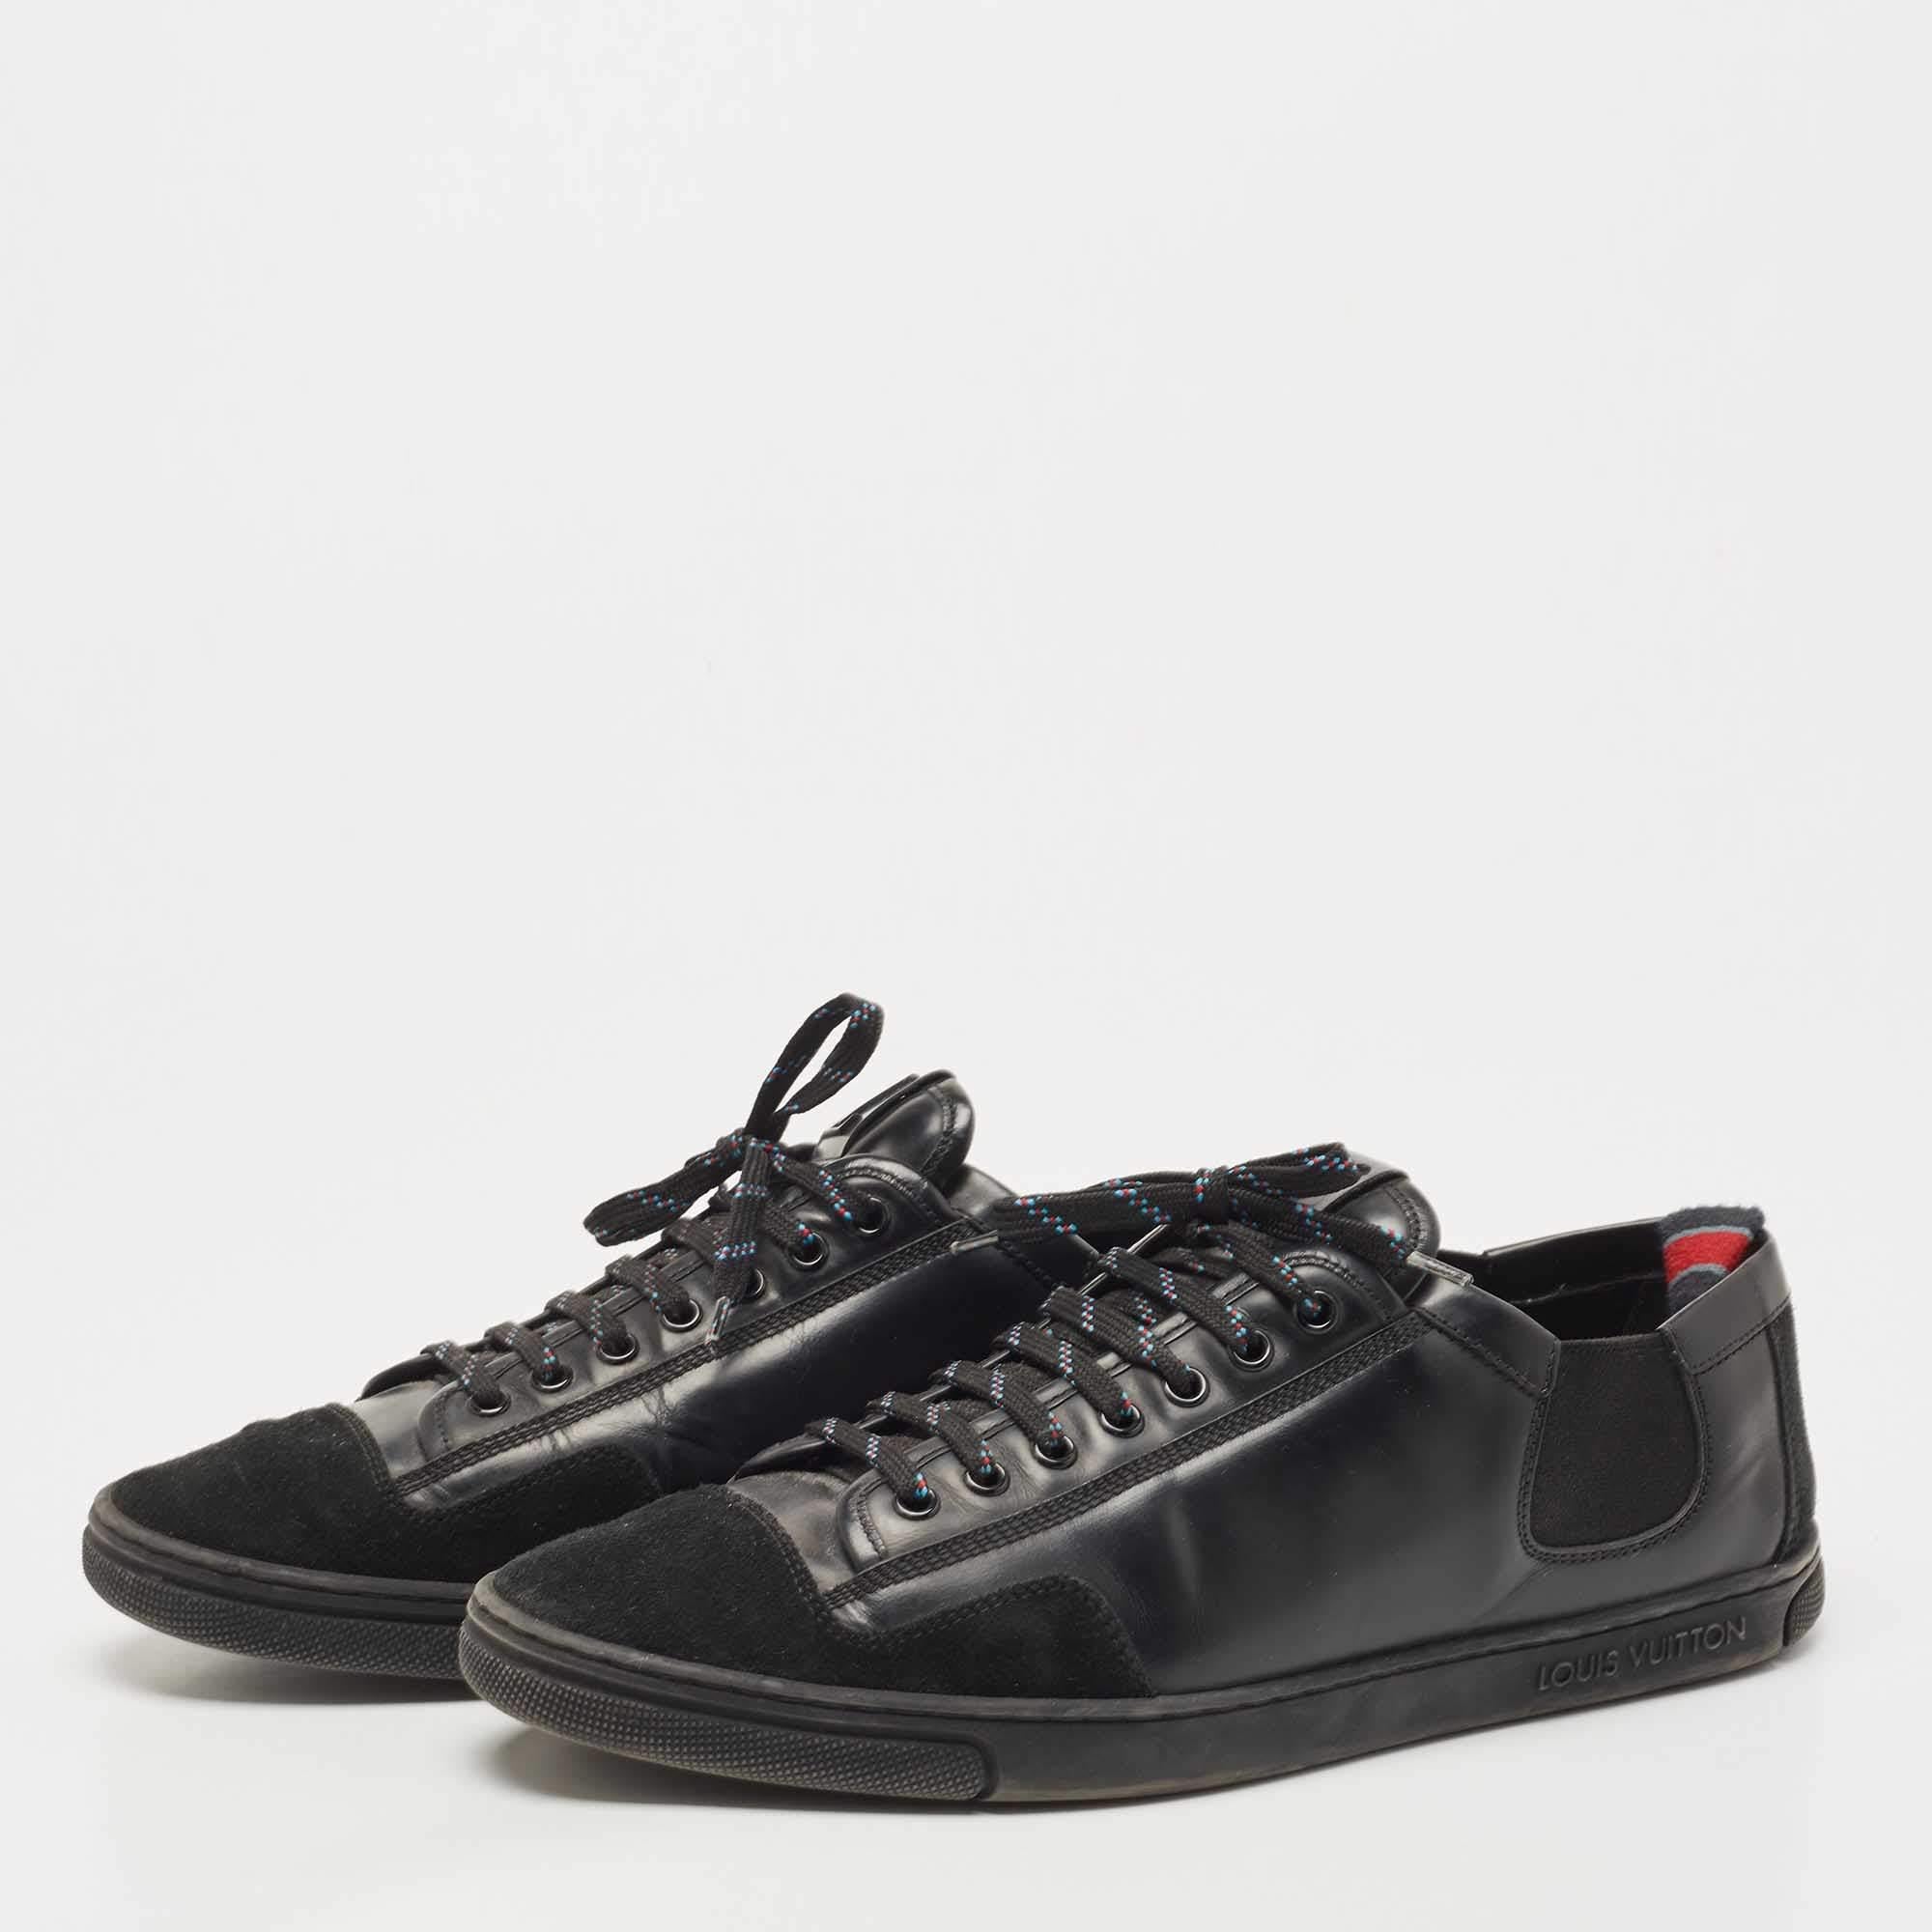 Men's Louis Vuitton Black Leather and Suede Low Top Sneakers Size 41 For Sale